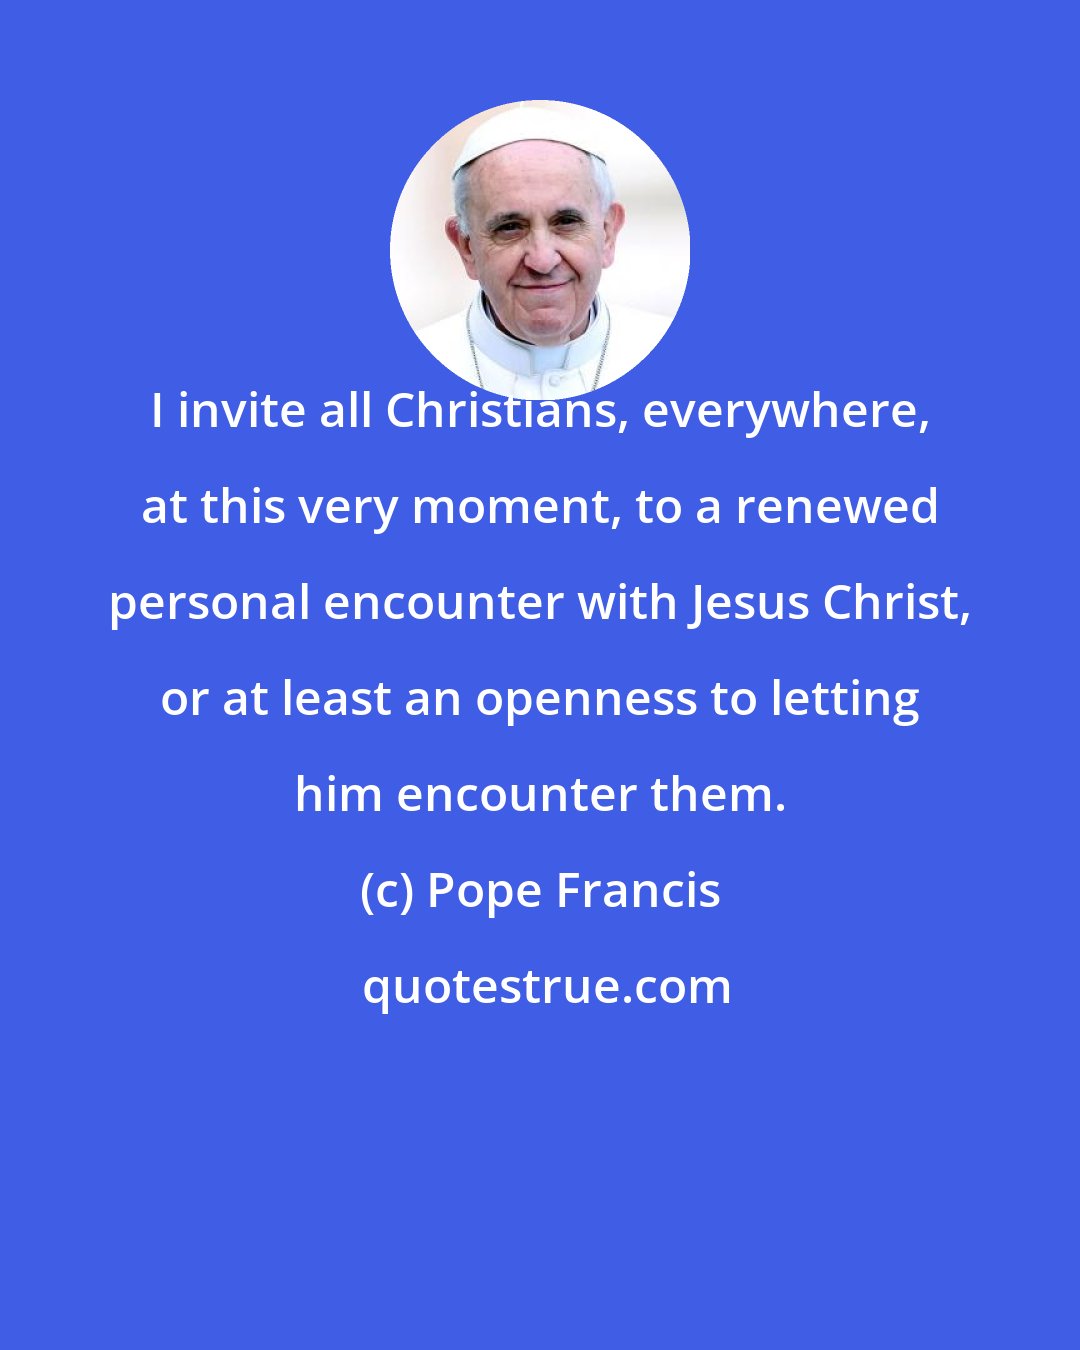 Pope Francis: I invite all Christians, everywhere, at this very moment, to a renewed personal encounter with Jesus Christ, or at least an openness to letting him encounter them.